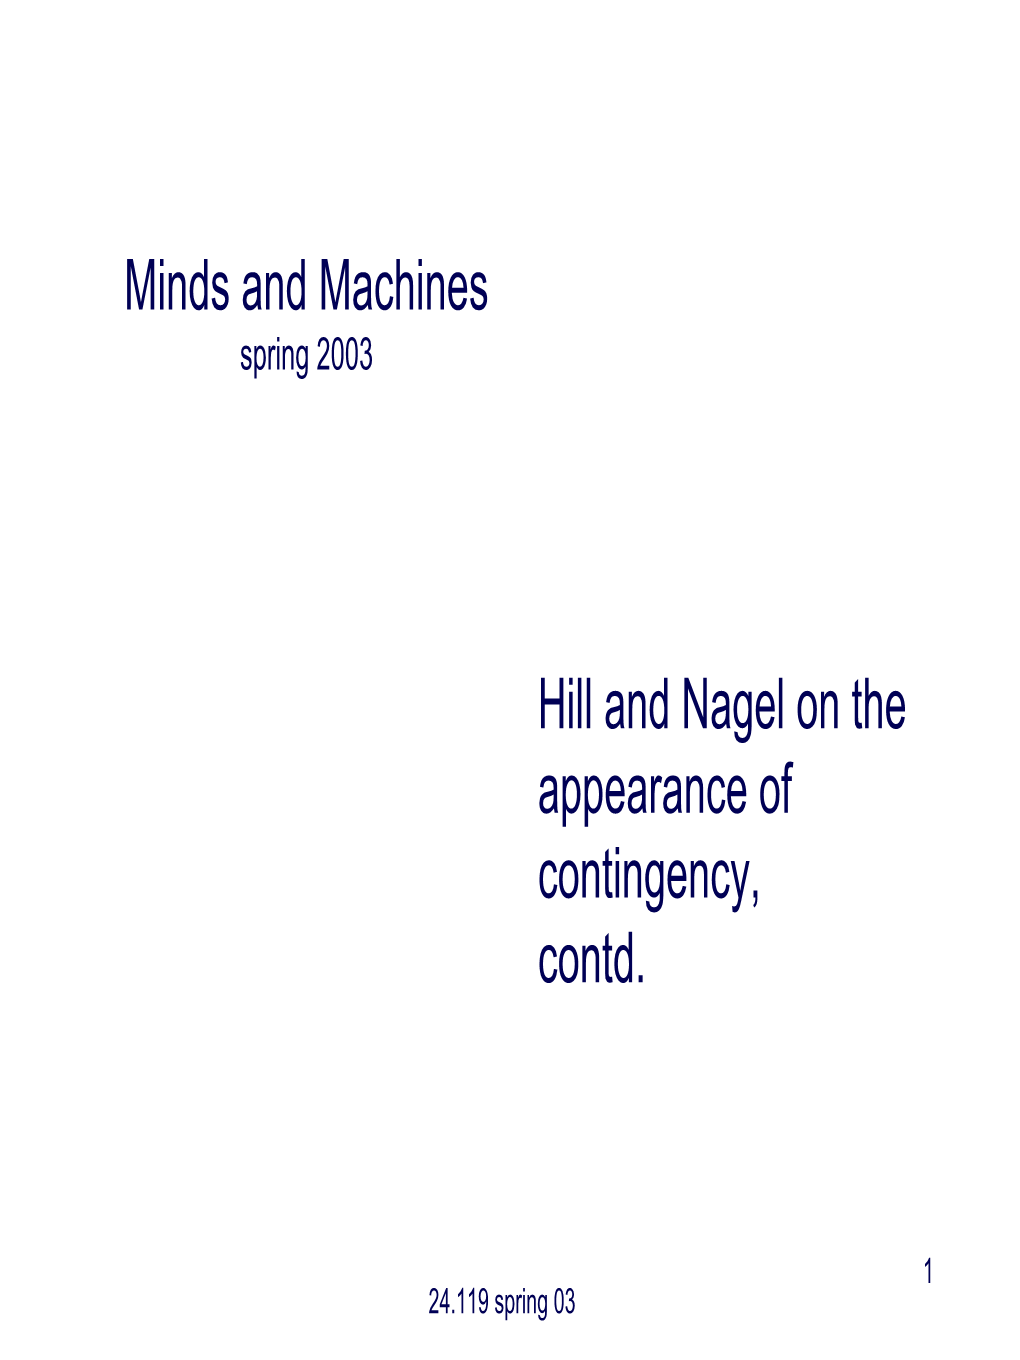 Hill and Nagel on the Appearance of Contingency, Contd